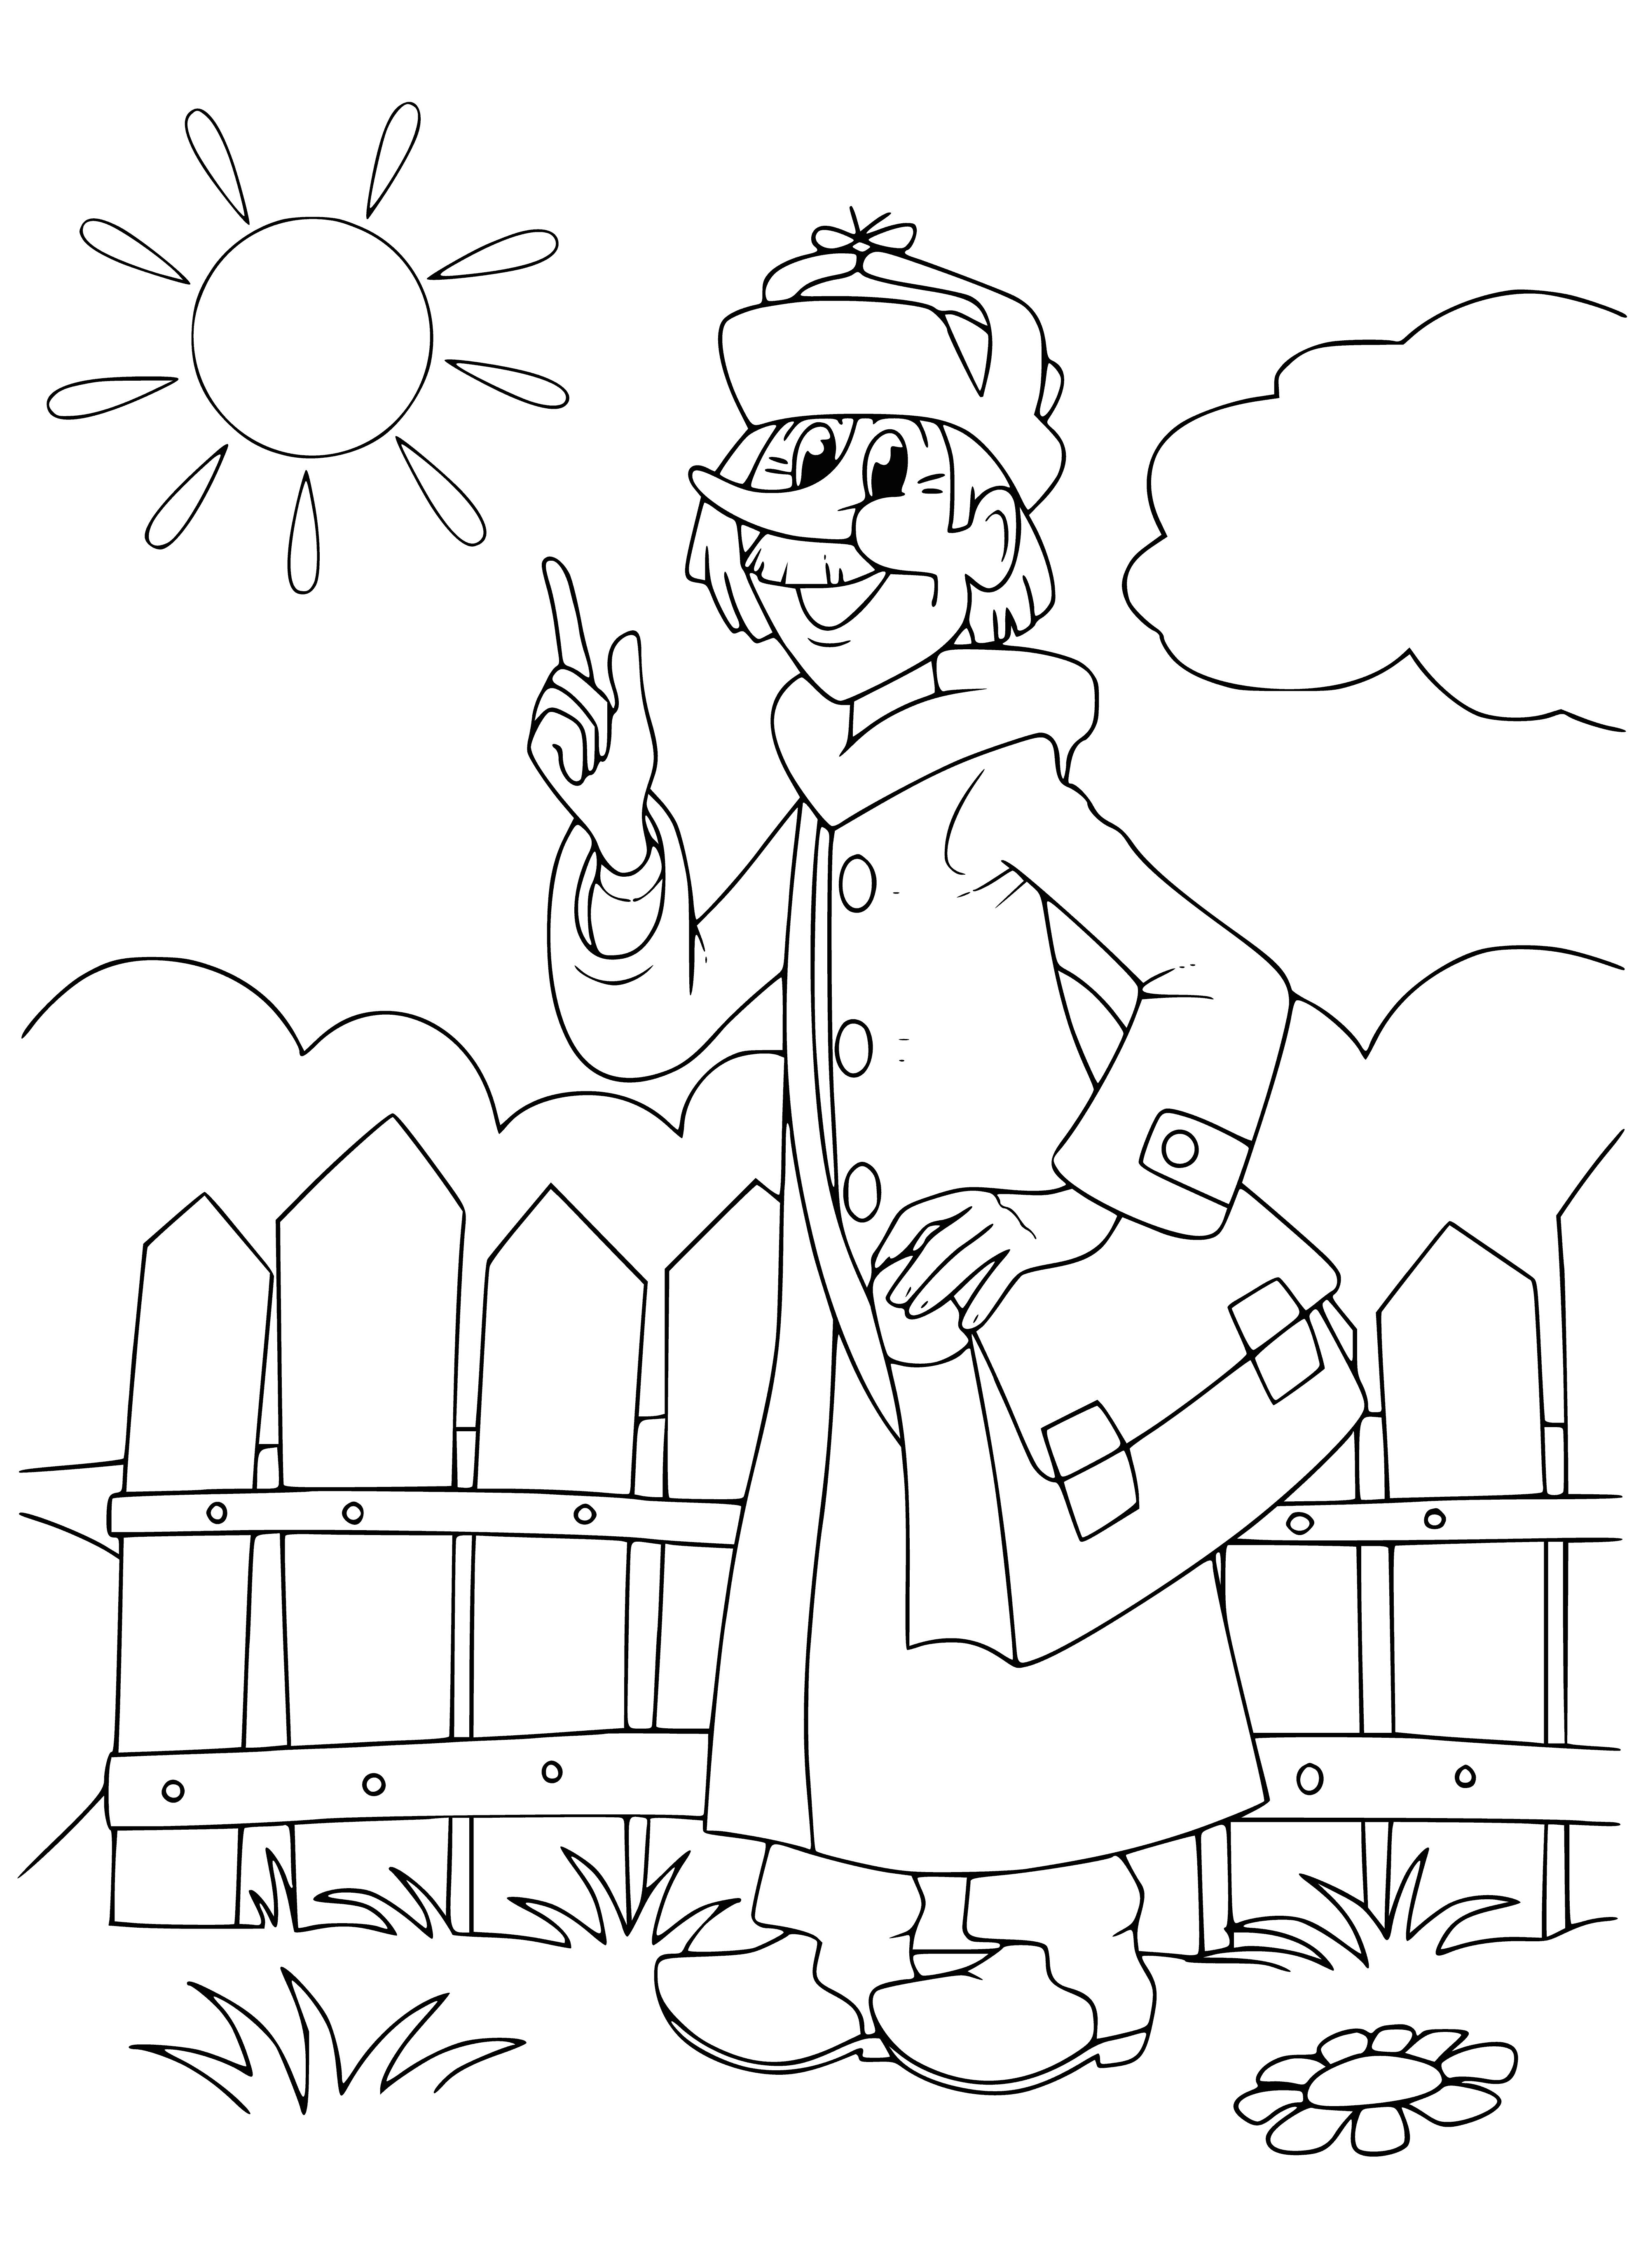 coloring page: Small village with houses of wood and stone. Red-hatted postman stands in front of the post office. #postman #village